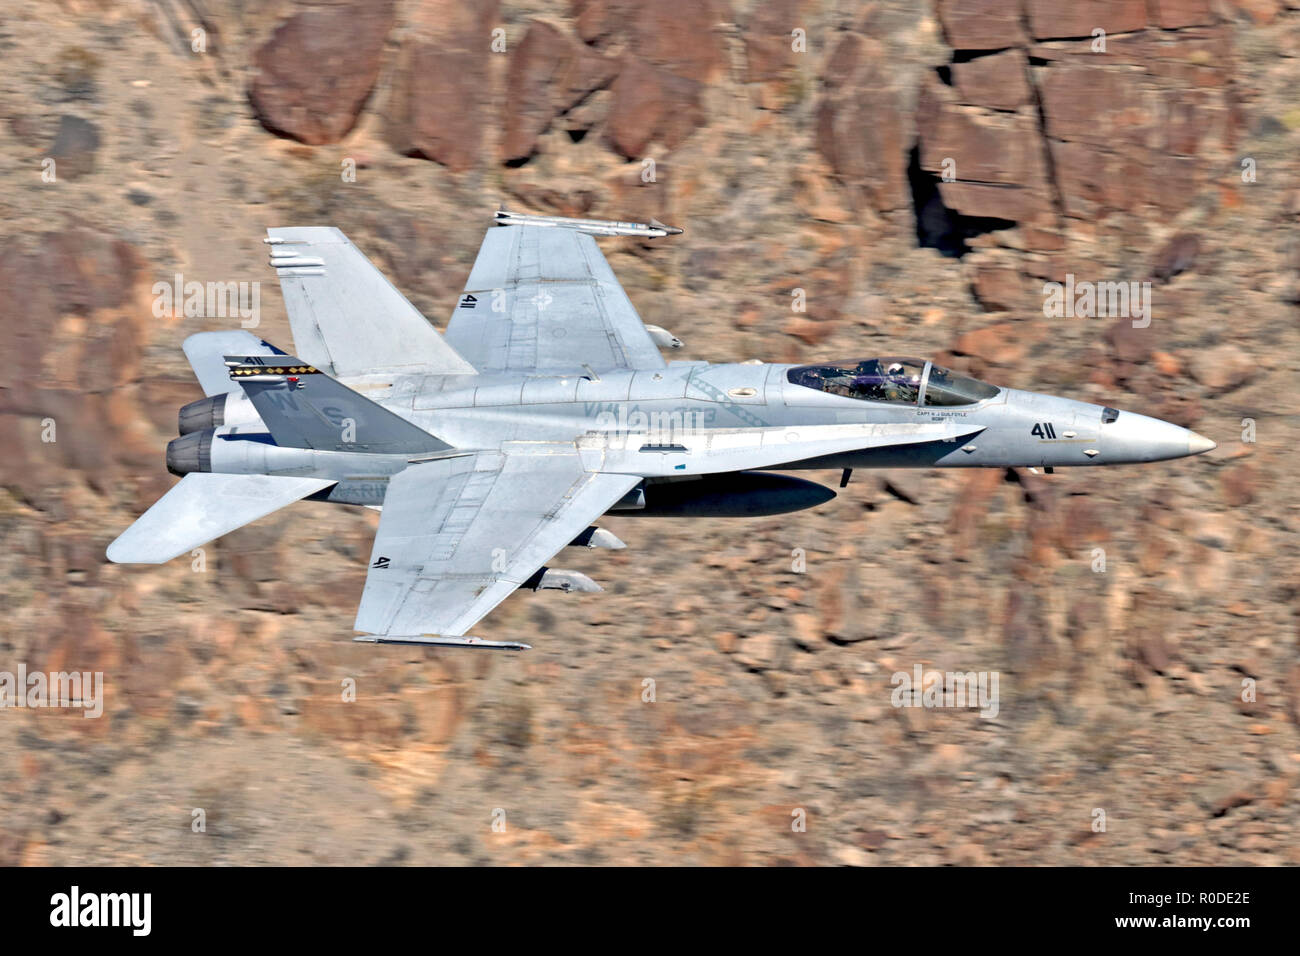 Boeing F/A-18C Hornet flown by US Marine squadron VMFA-323 'Death Rattlers' from MCAS Miramar Flying through Death Valley during 2019 Stock Photo